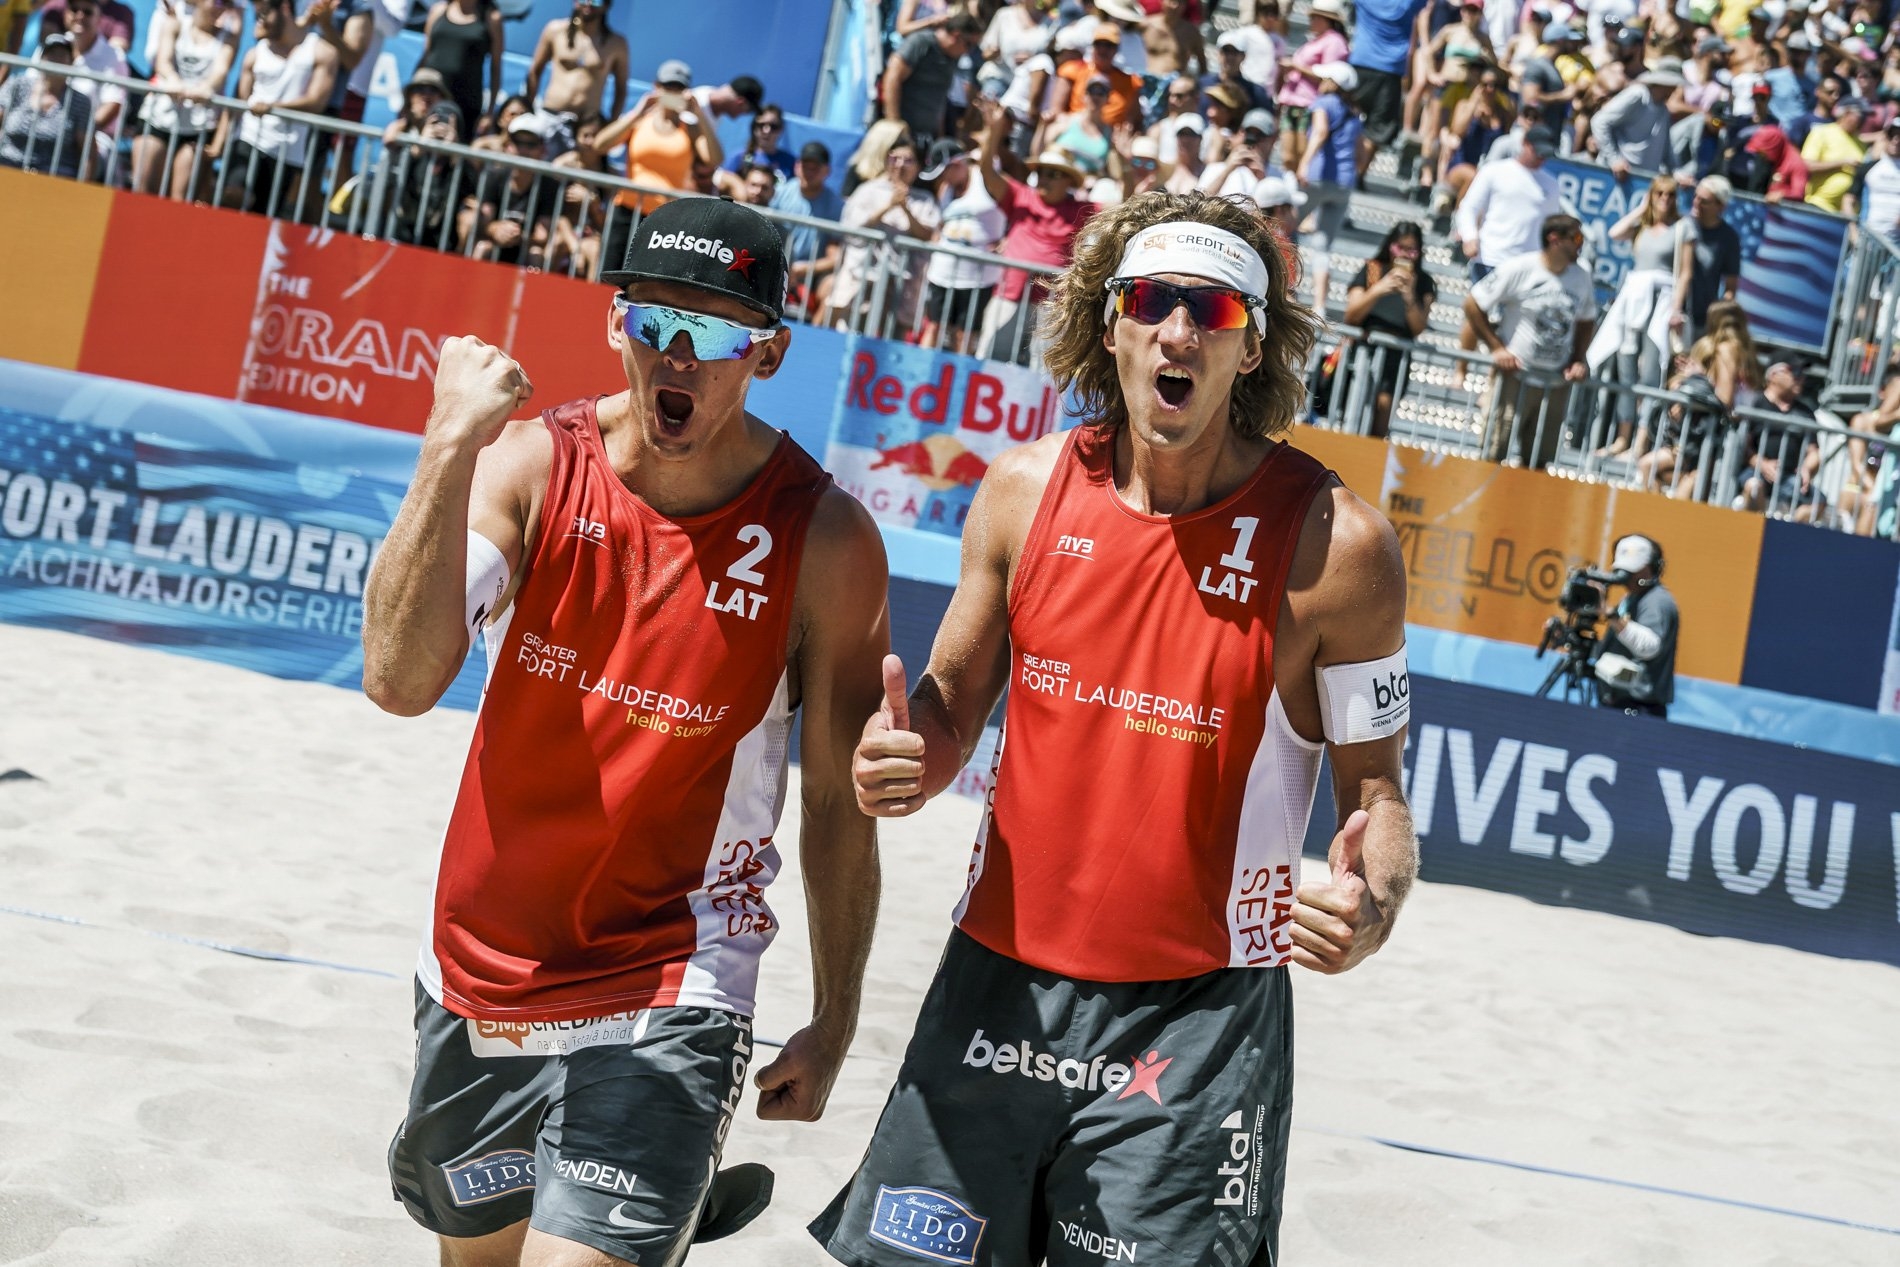 Smedins and Samoilovs reached the podium in the first Beach Major Series event of the year